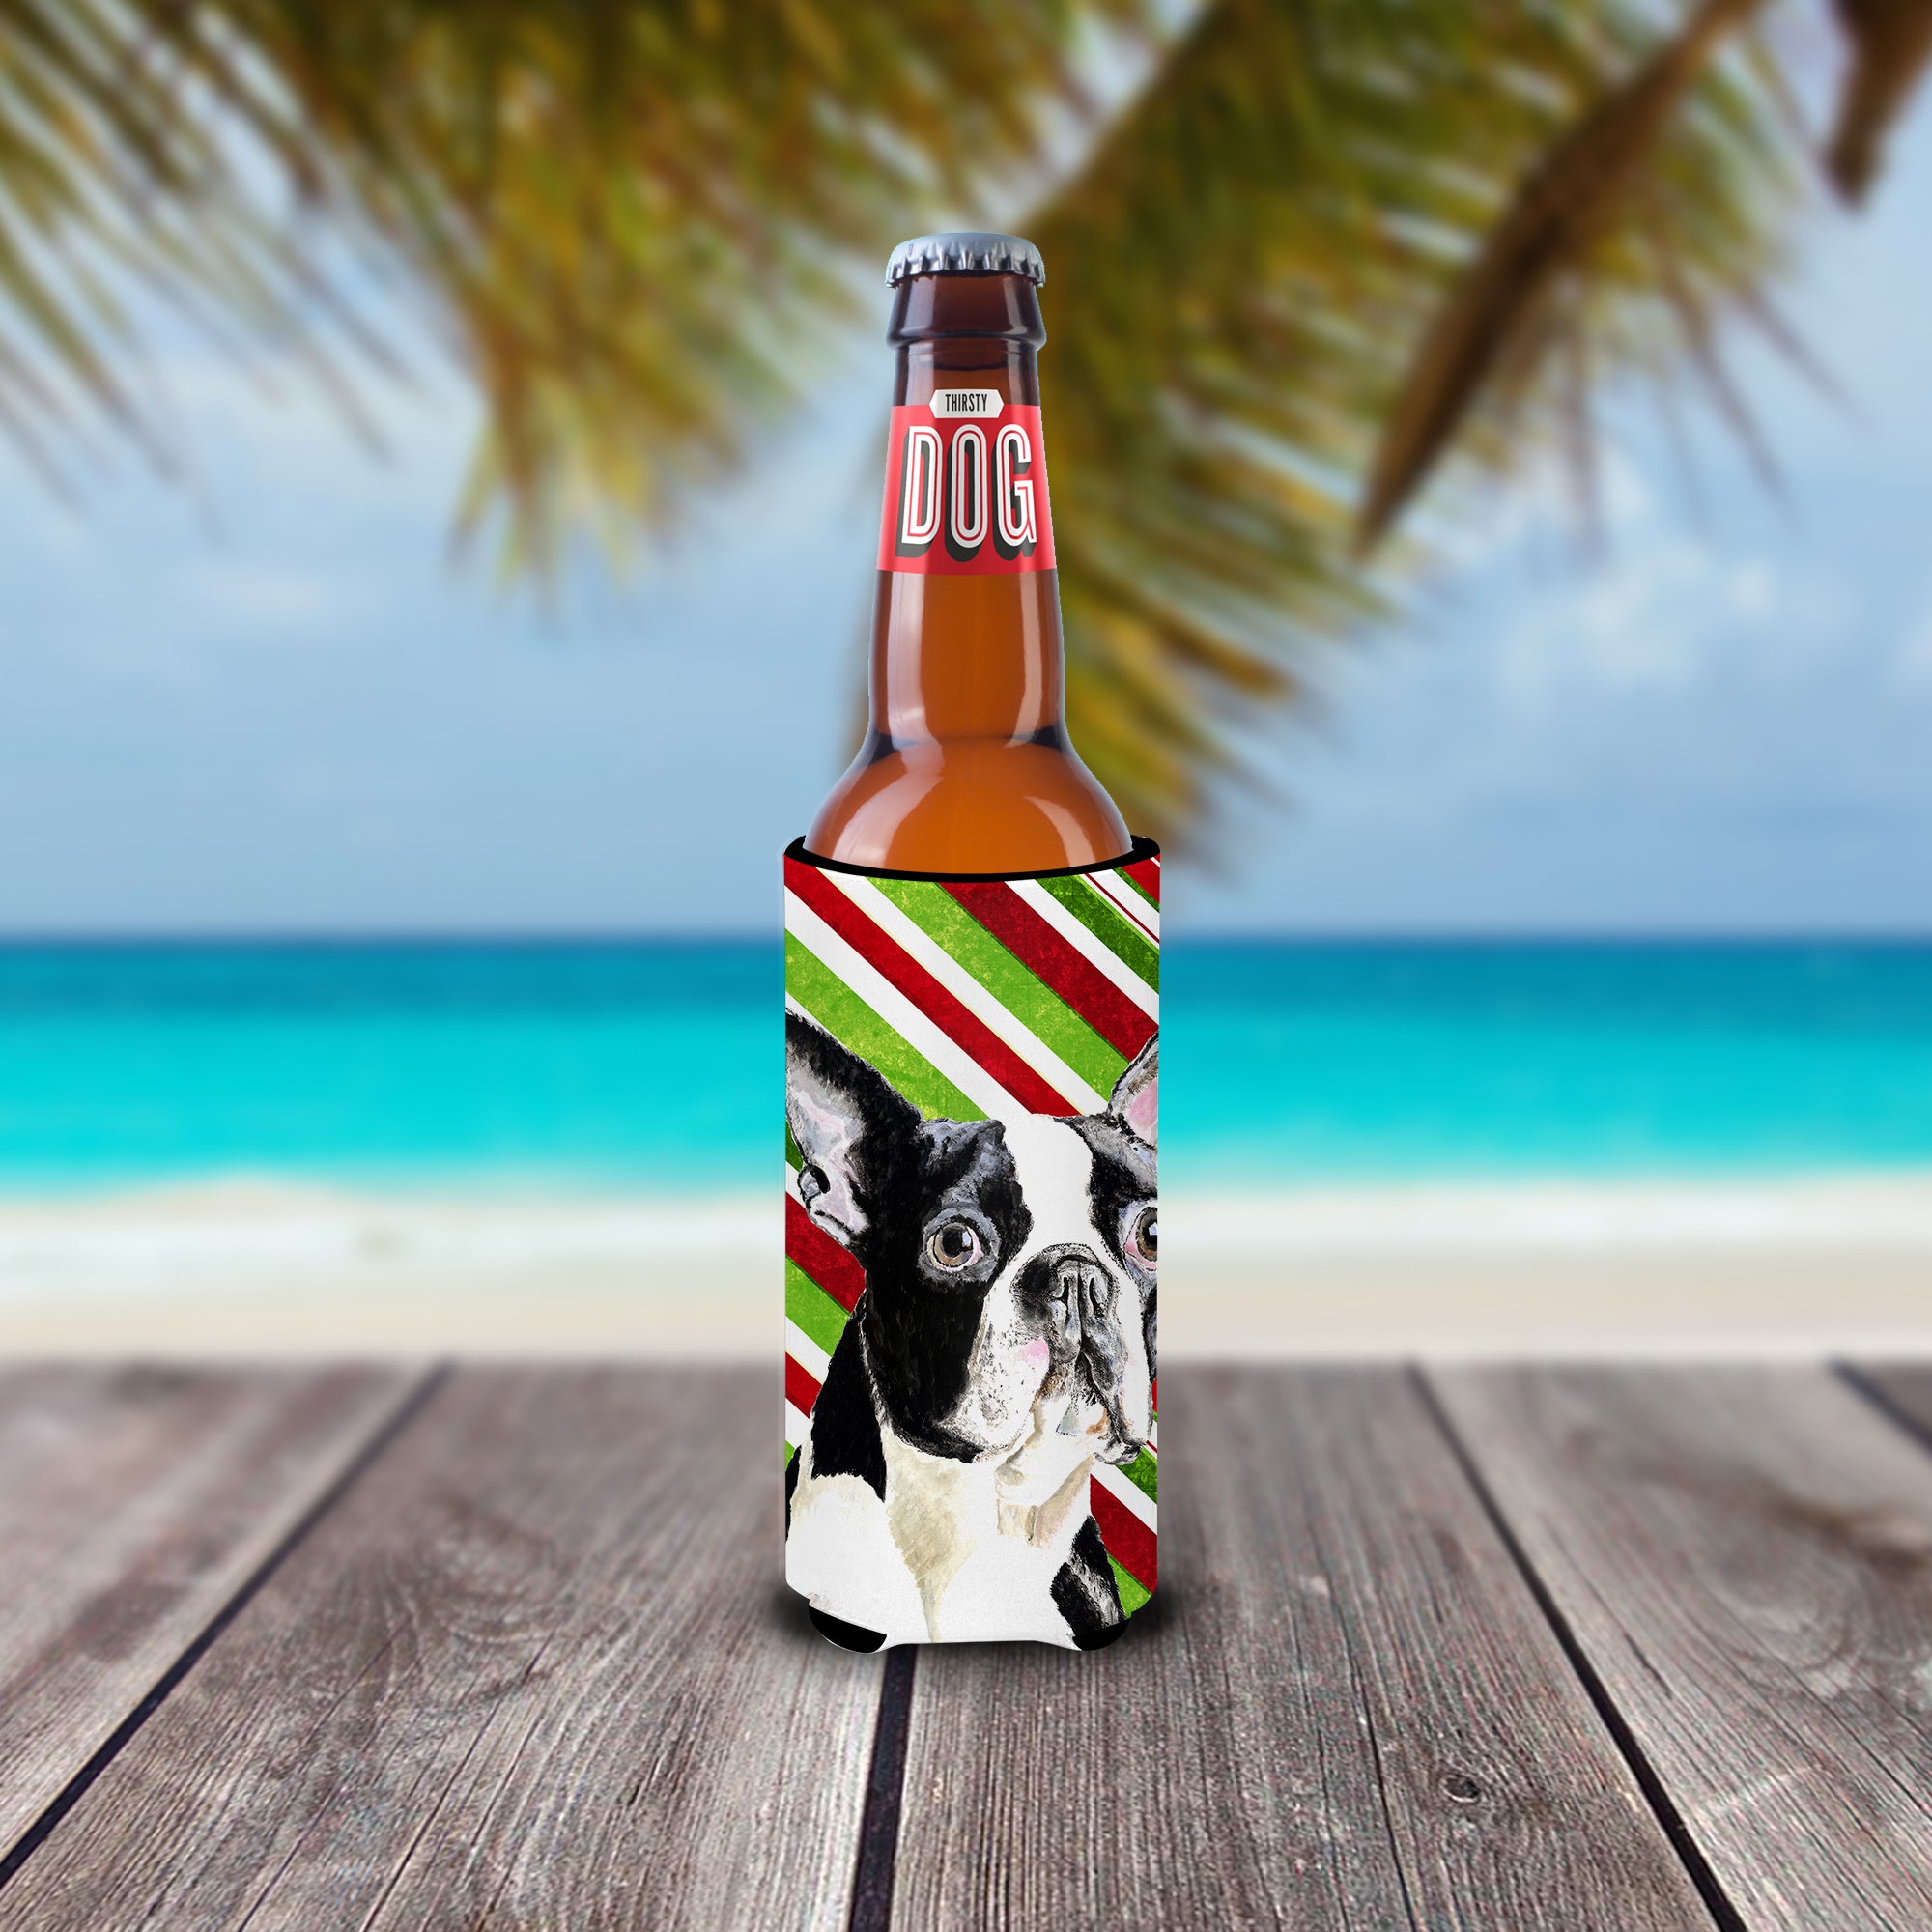 Boston Terrier Candy Cane Holiday Christmas Ultra Beverage Insulators for slim cans SC9320MUK